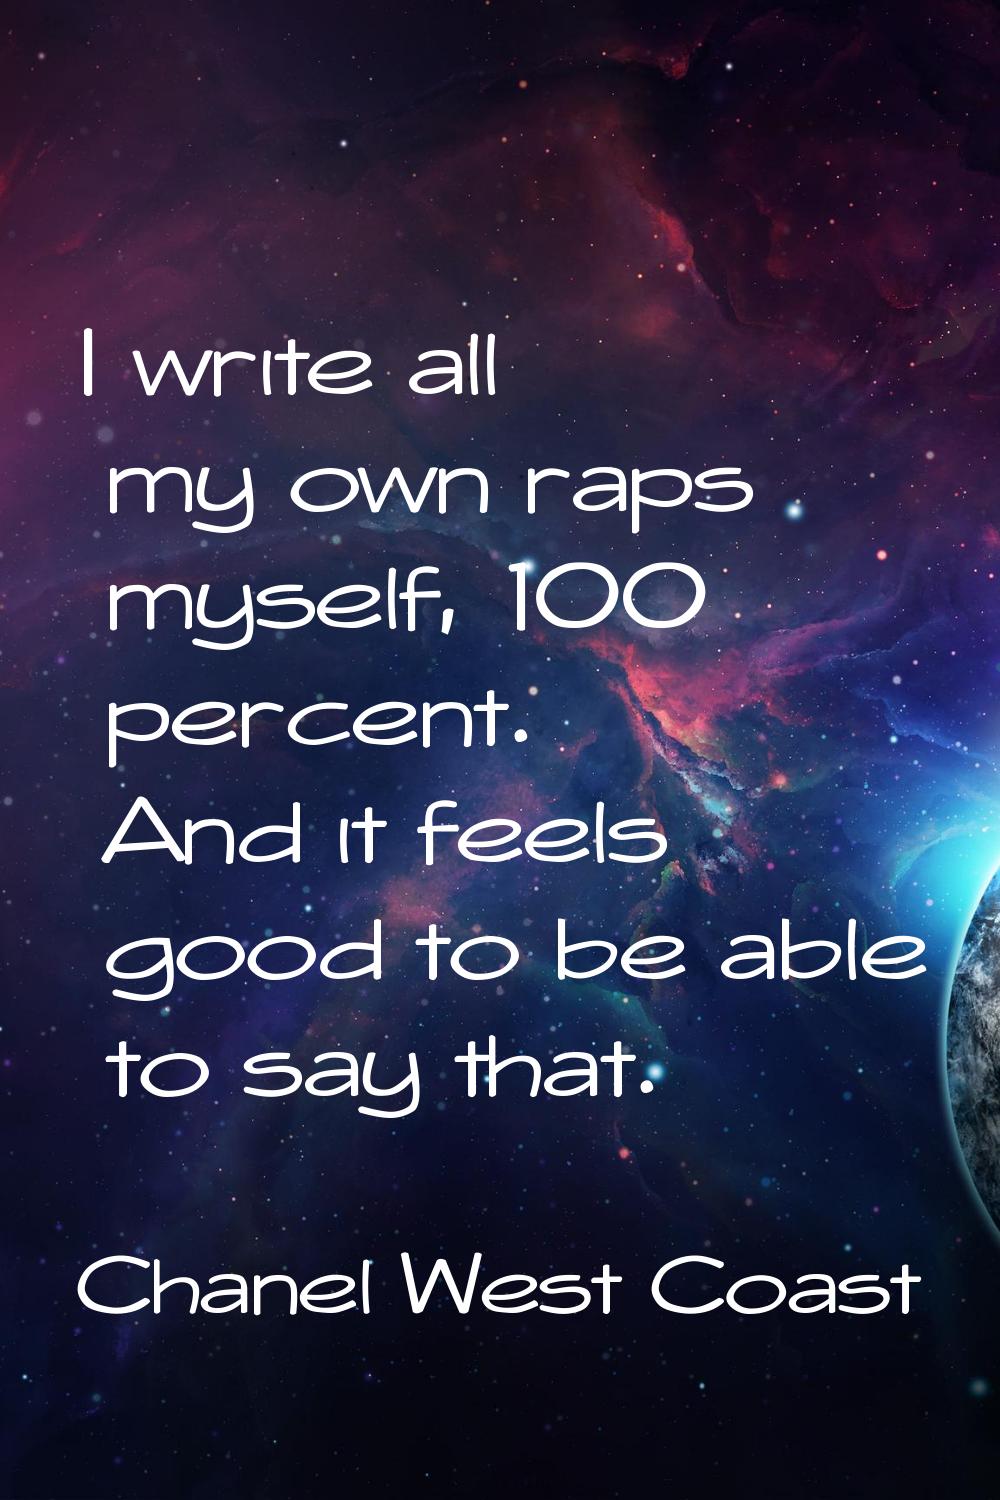 I write all my own raps myself, 100 percent. And it feels good to be able to say that.